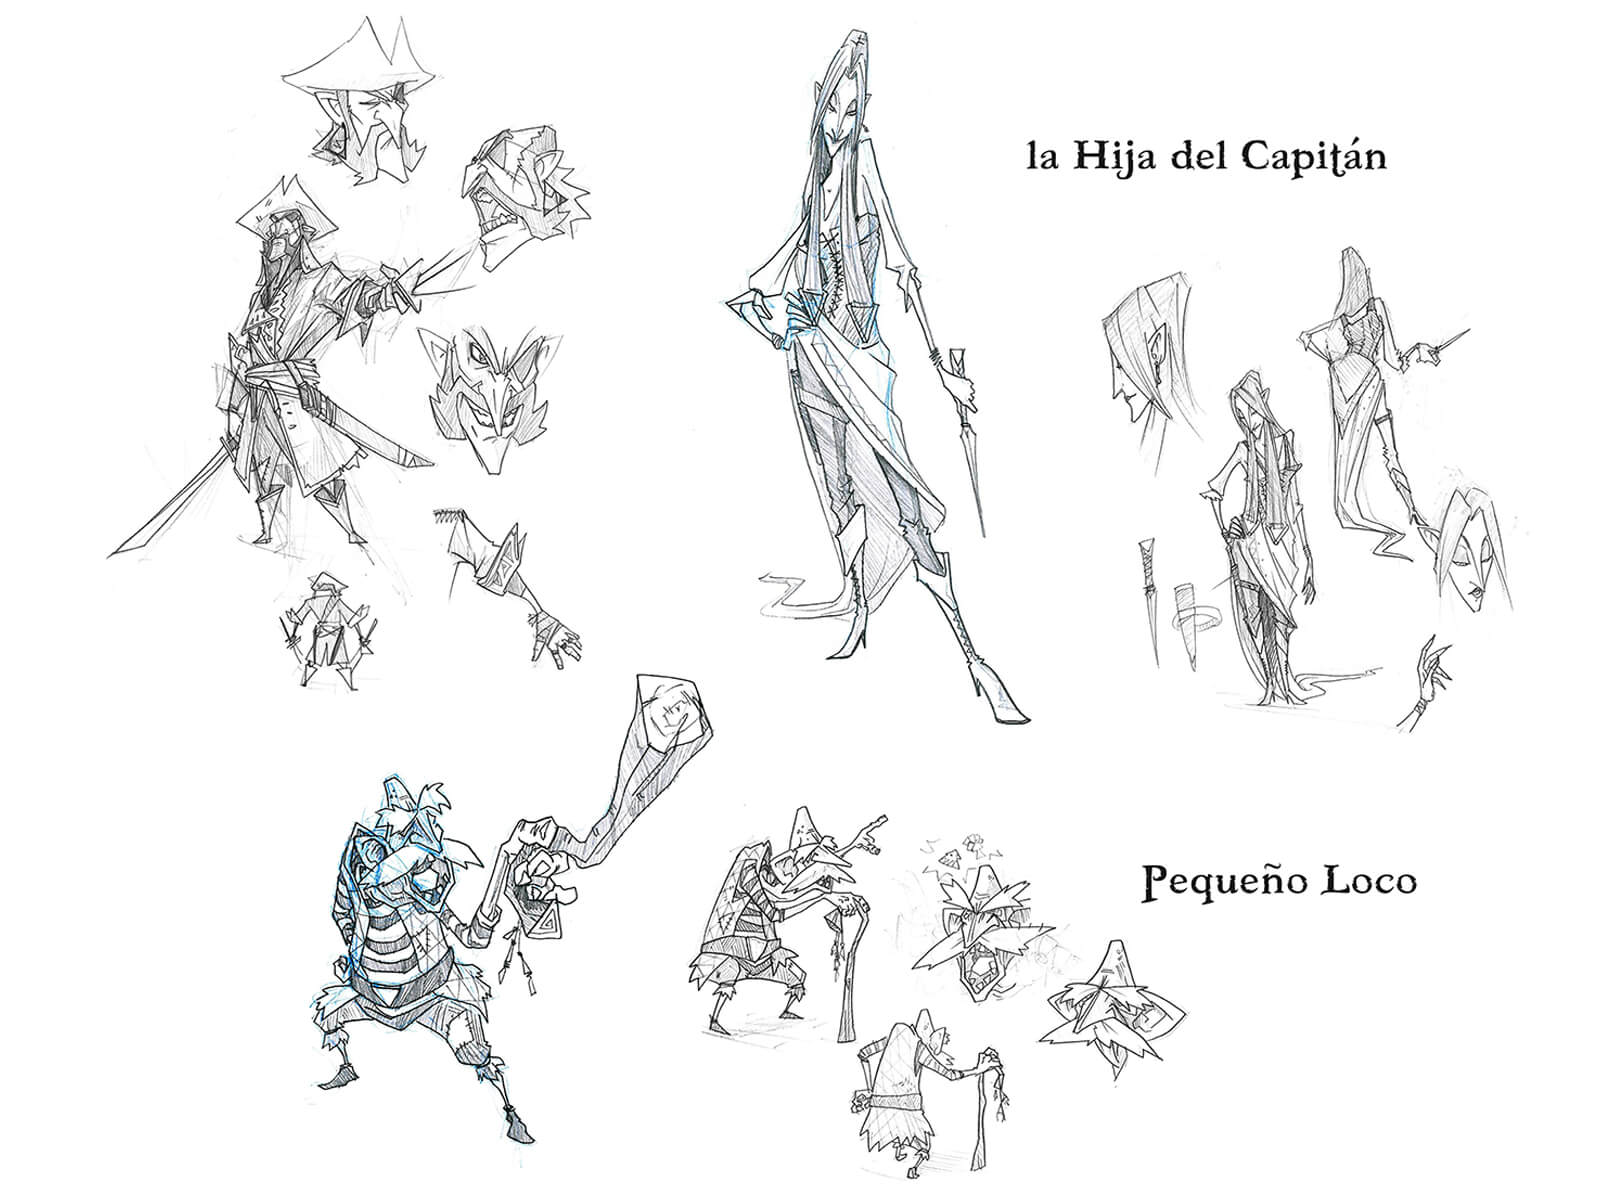 Black-and-white sketches of an angular pirate captain, his daughter, and an elderly man with a walking stick.